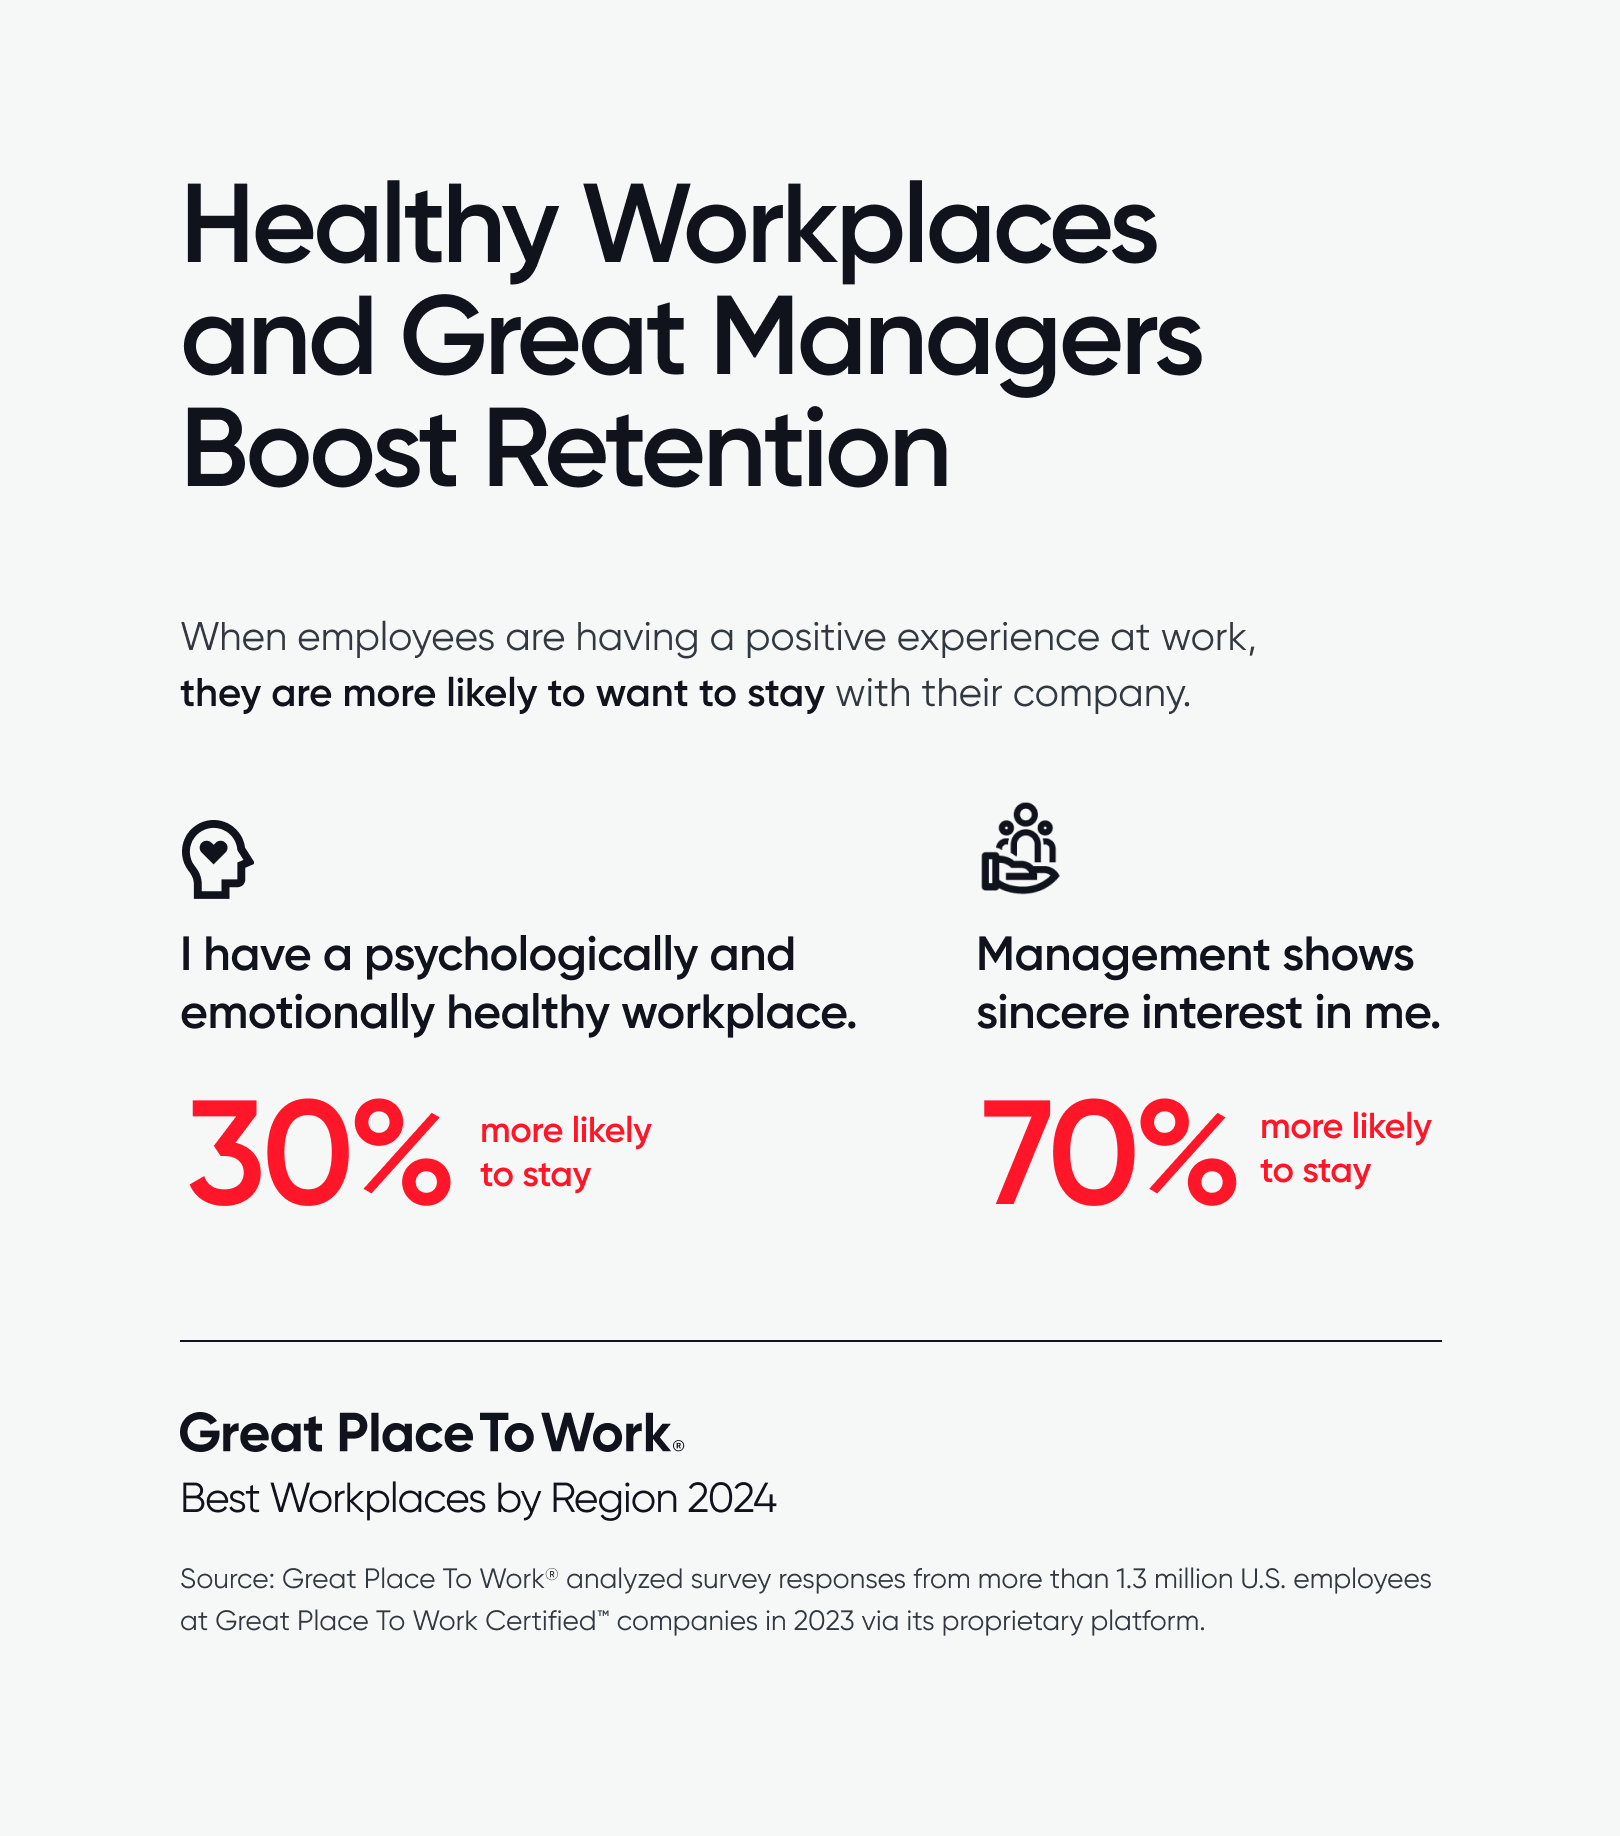 Healthy Workplaces and Great Managers Boost Retention